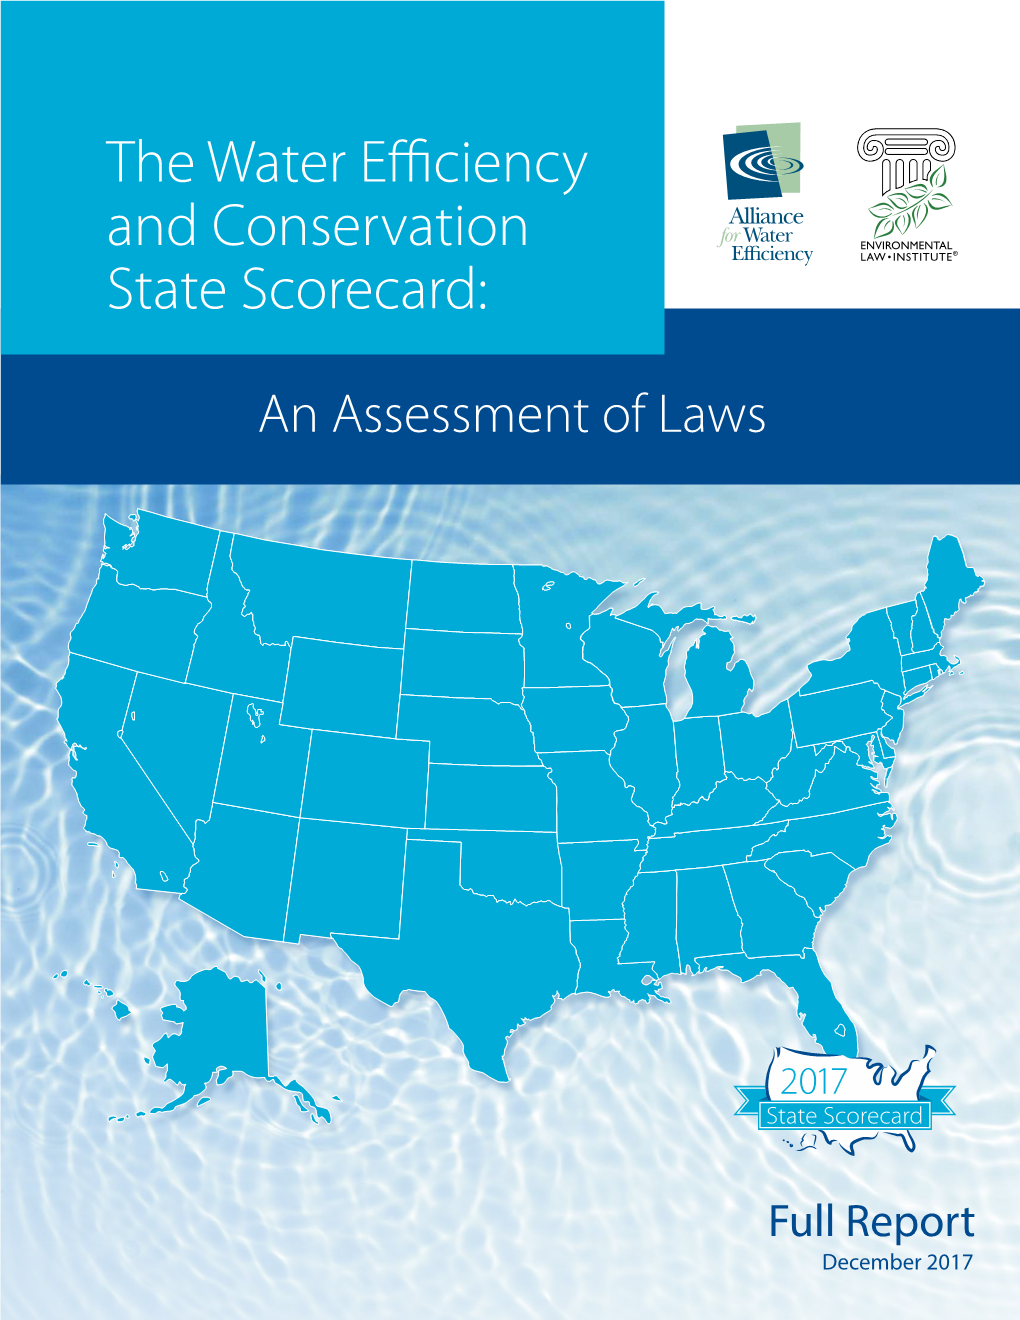 The Water Efficiency and Conservation State Scorecard